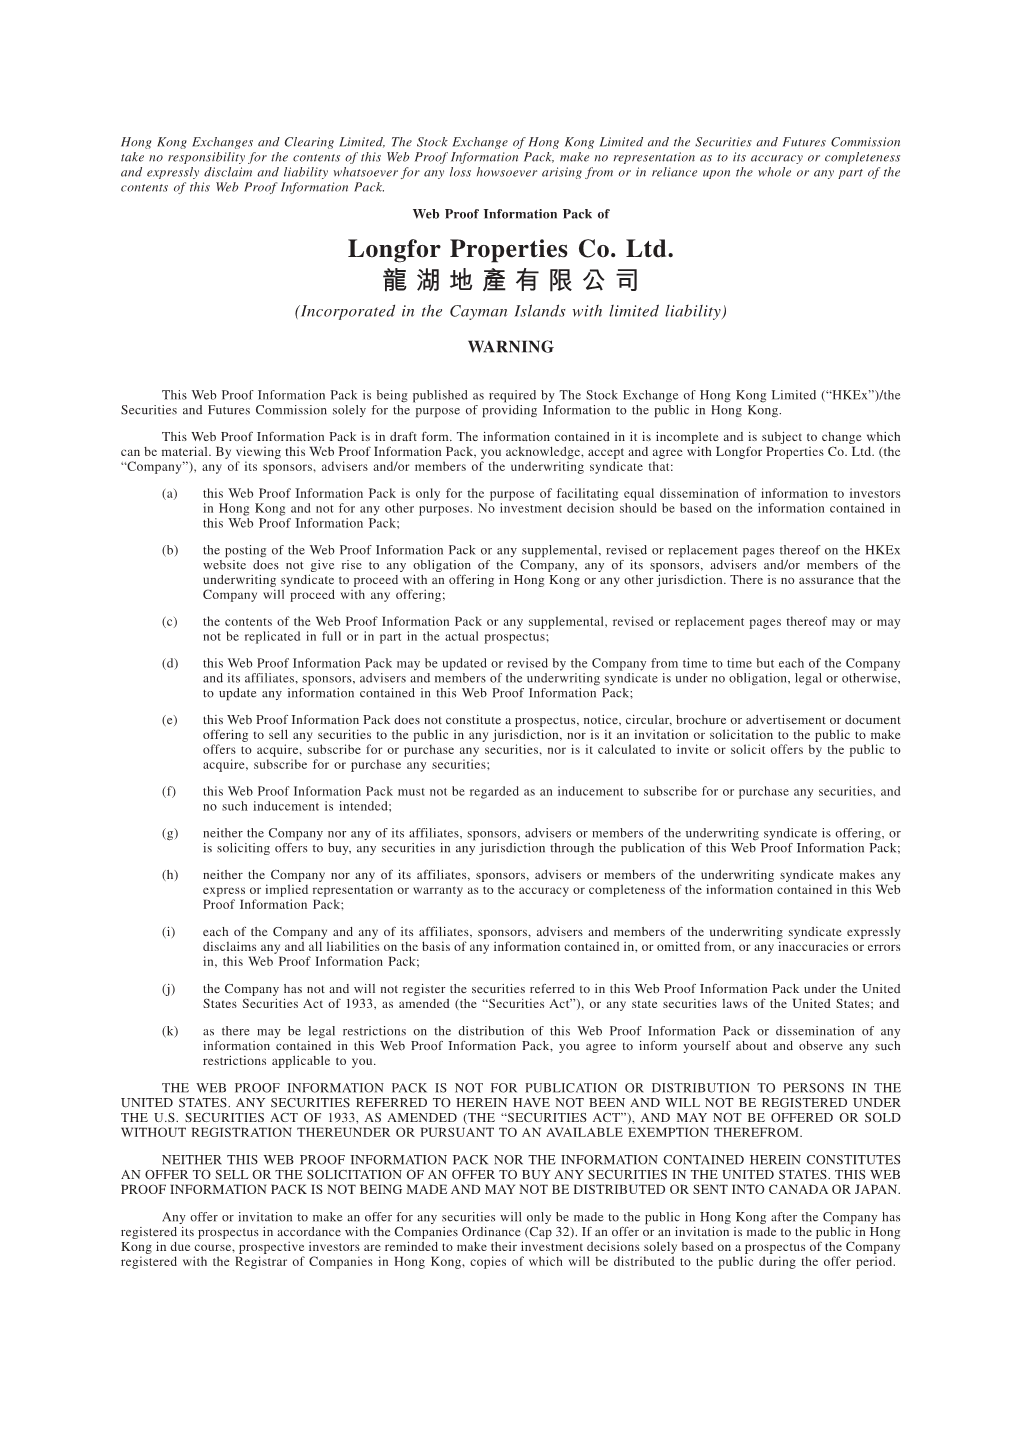 Longfor Properties Co. Ltd. 龍湖地產有限公司 (Incorporated in the Cayman Islands with Limited Liability)